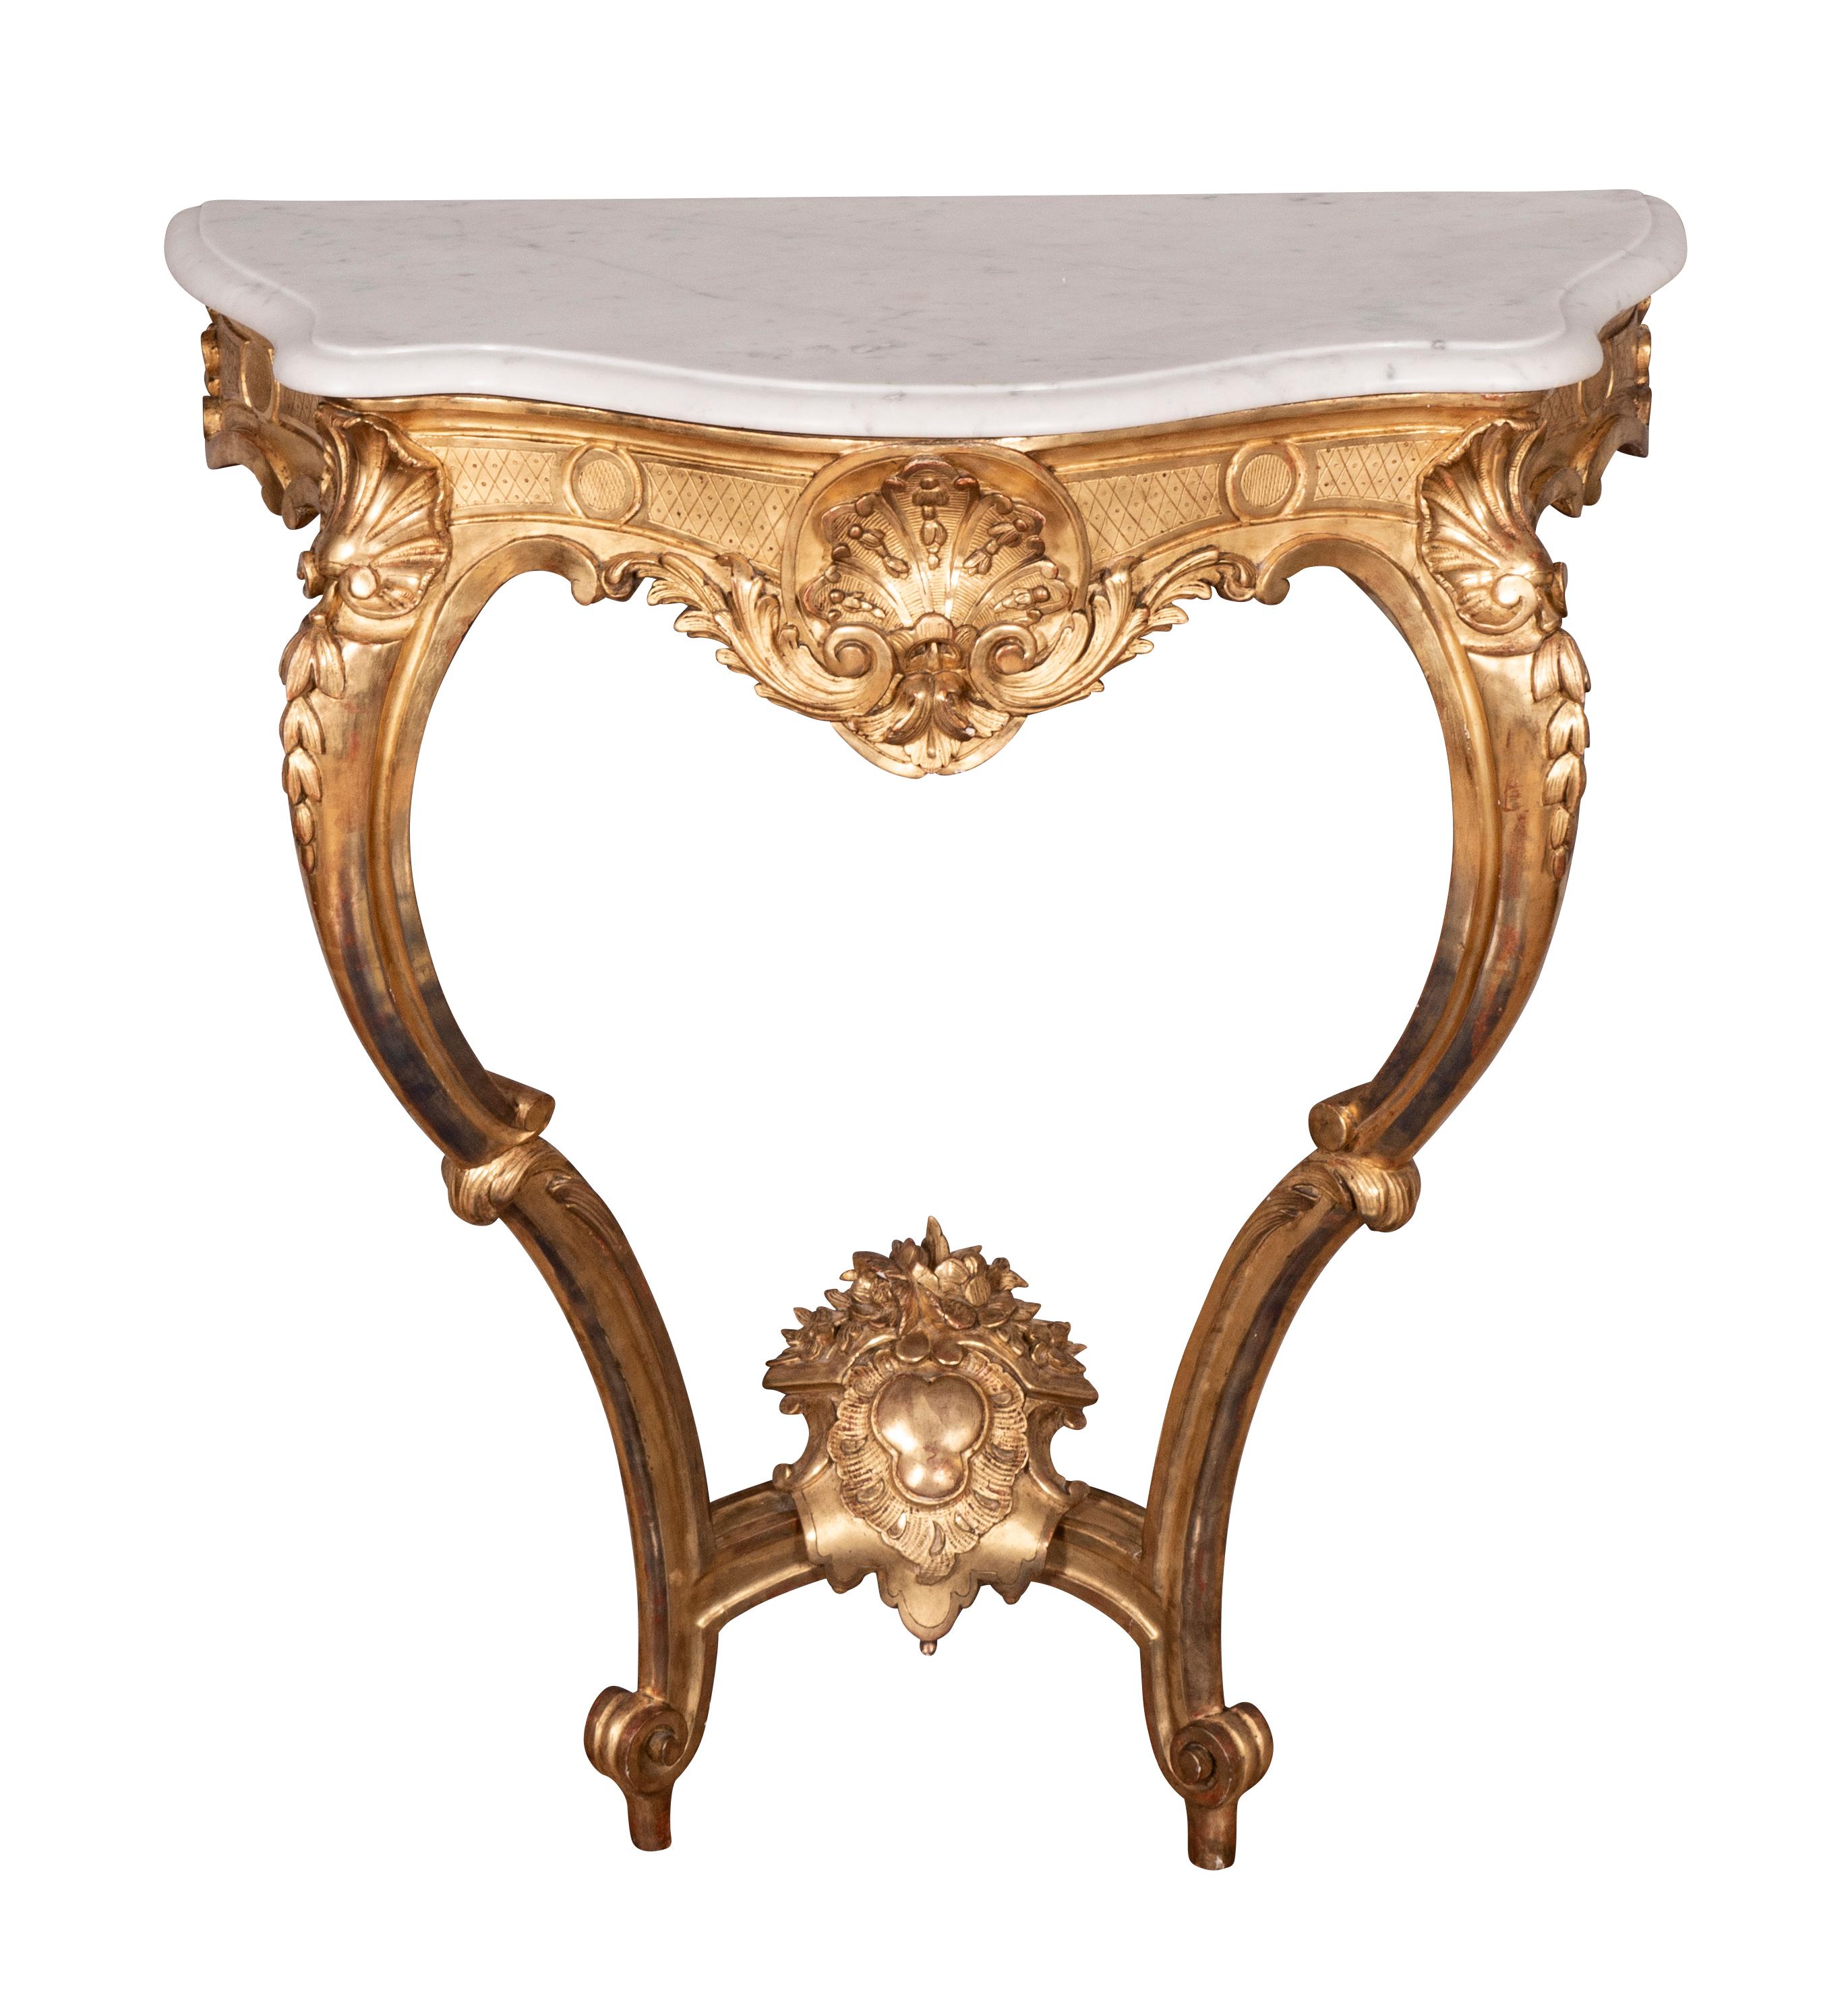 Each water gilded with 23ct gold leaf in excellent condition. Serpentine white marble top over a conforming frieze with central shell and surrounded by diaperwork. Raised on cabriole legs headed by shell decoration. Lower central cartouche at